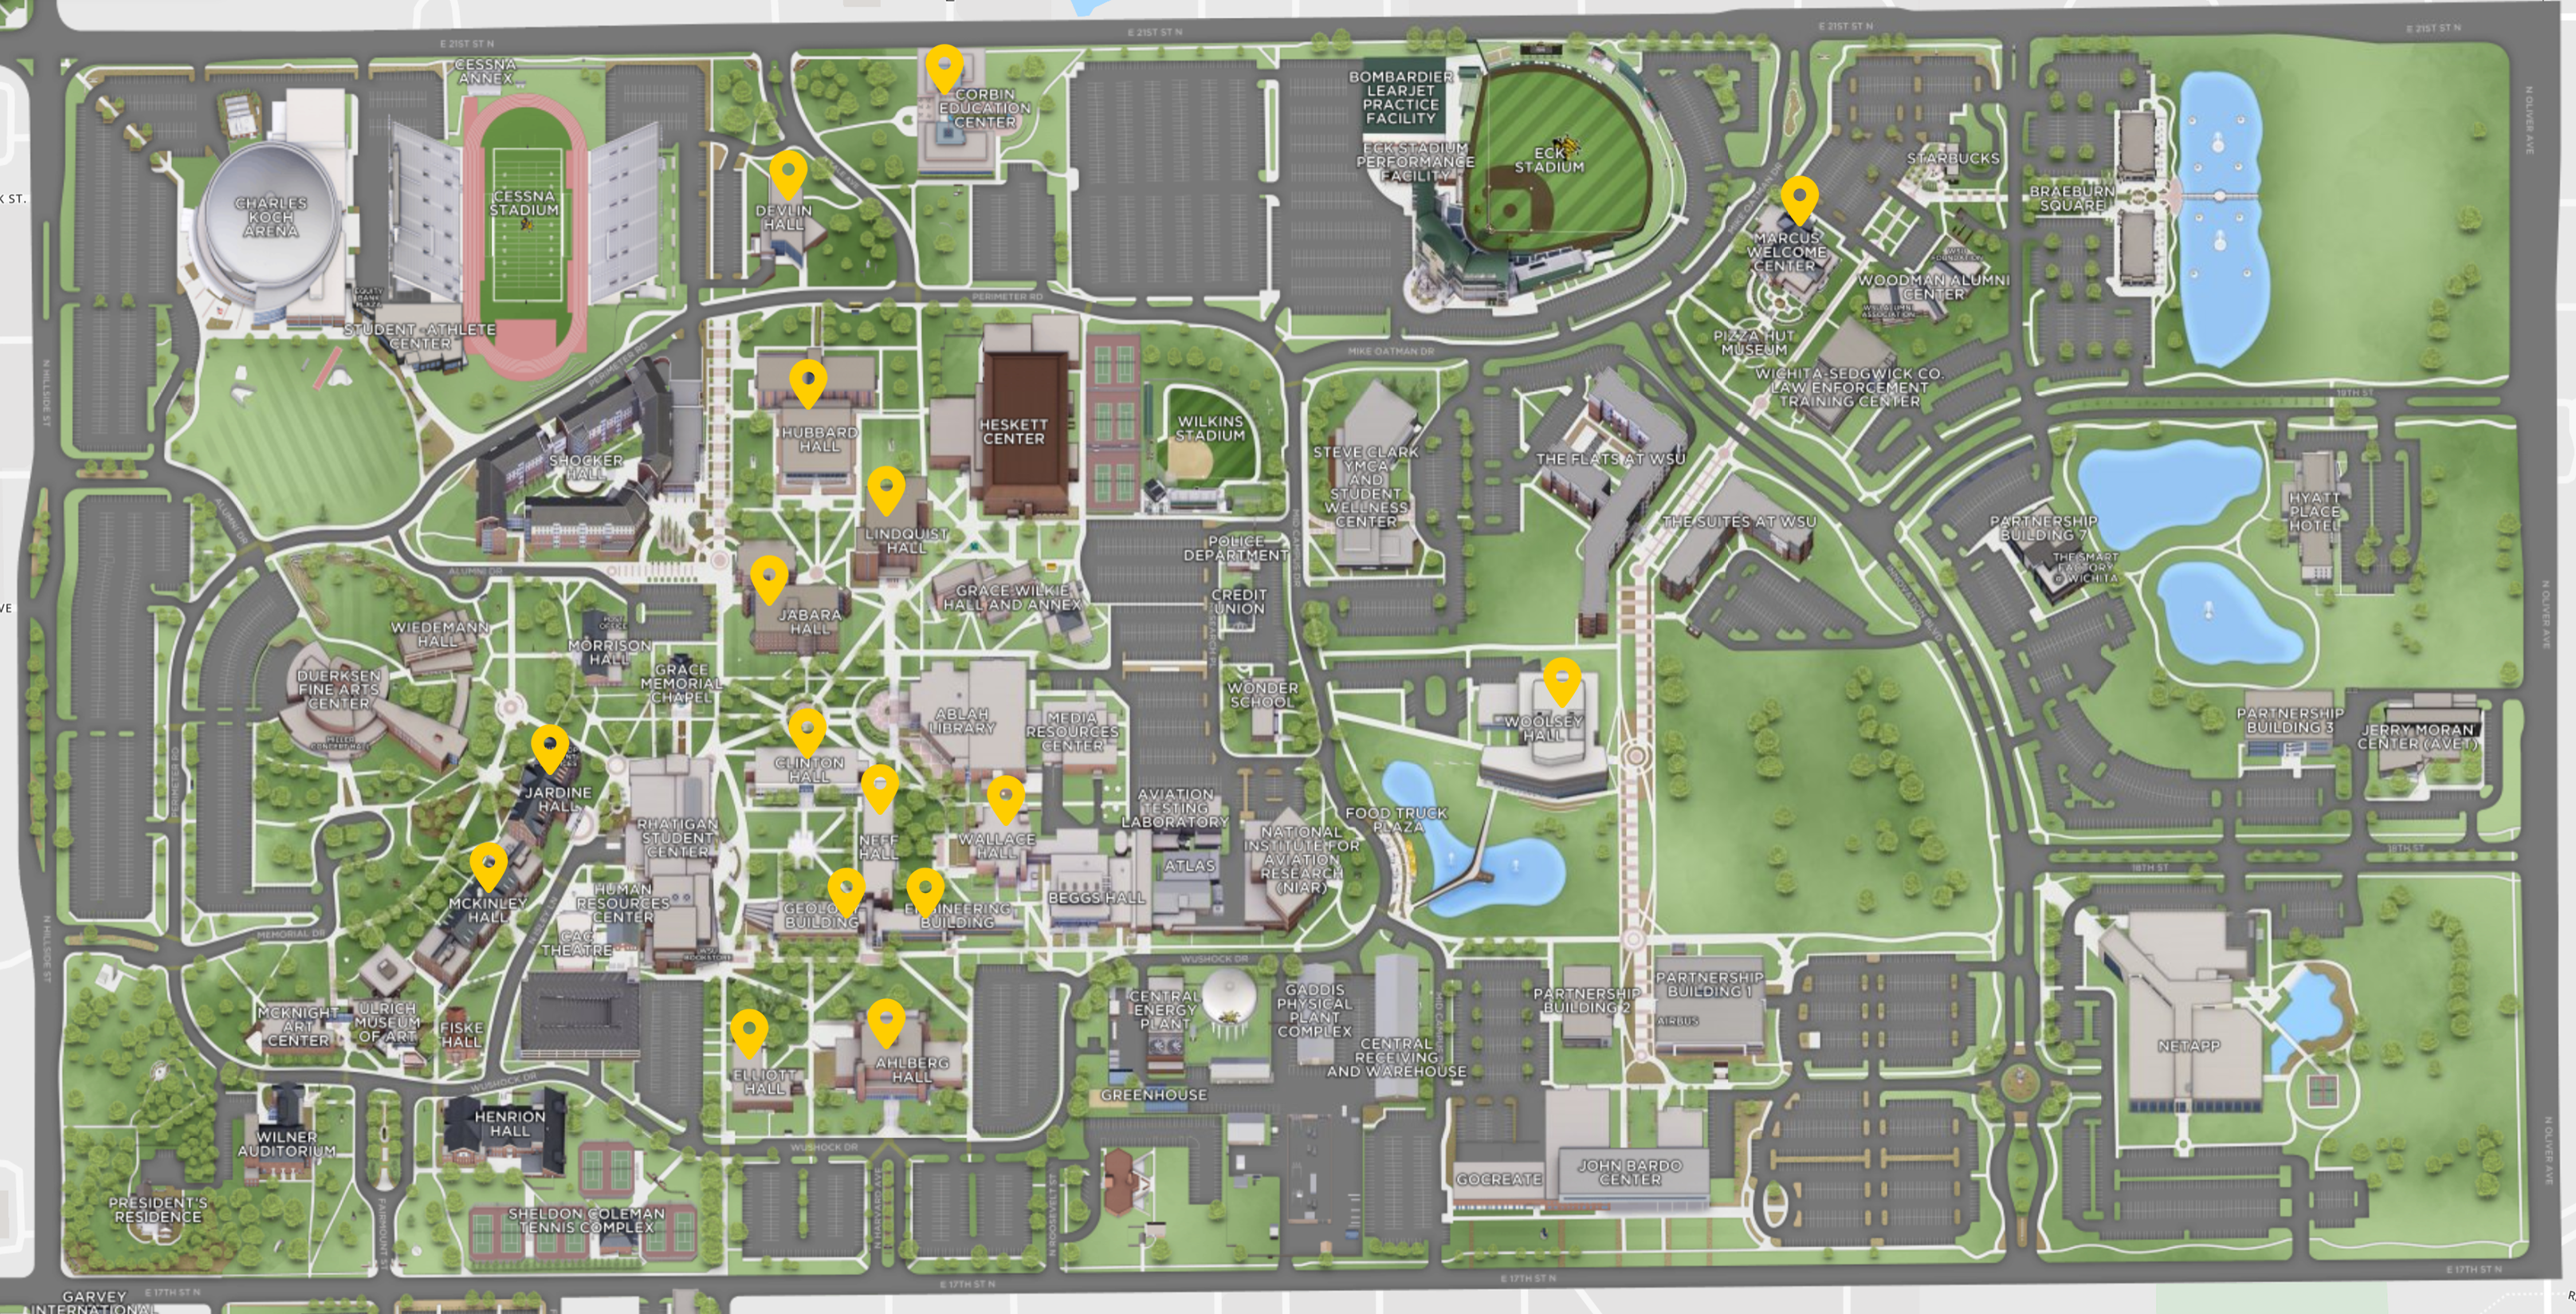 Campus Map with scheduling locations marked